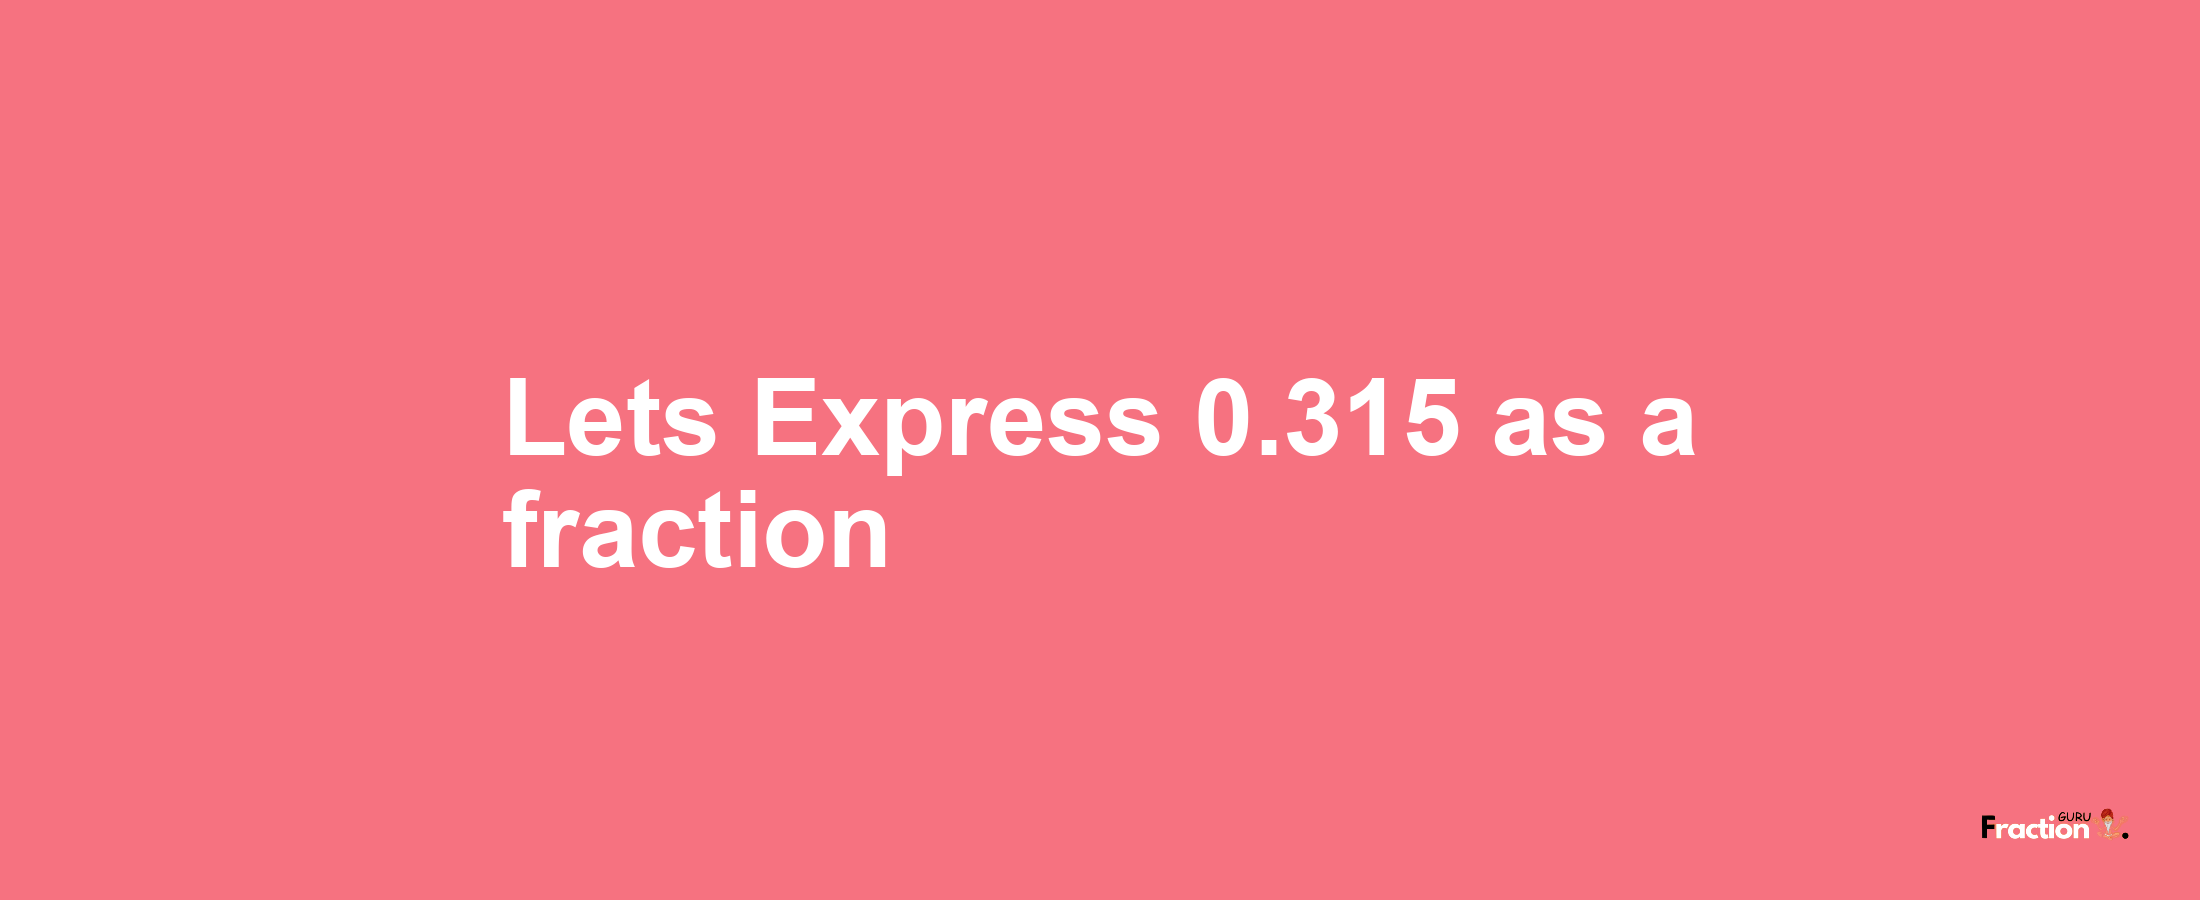 Lets Express 0.315 as afraction